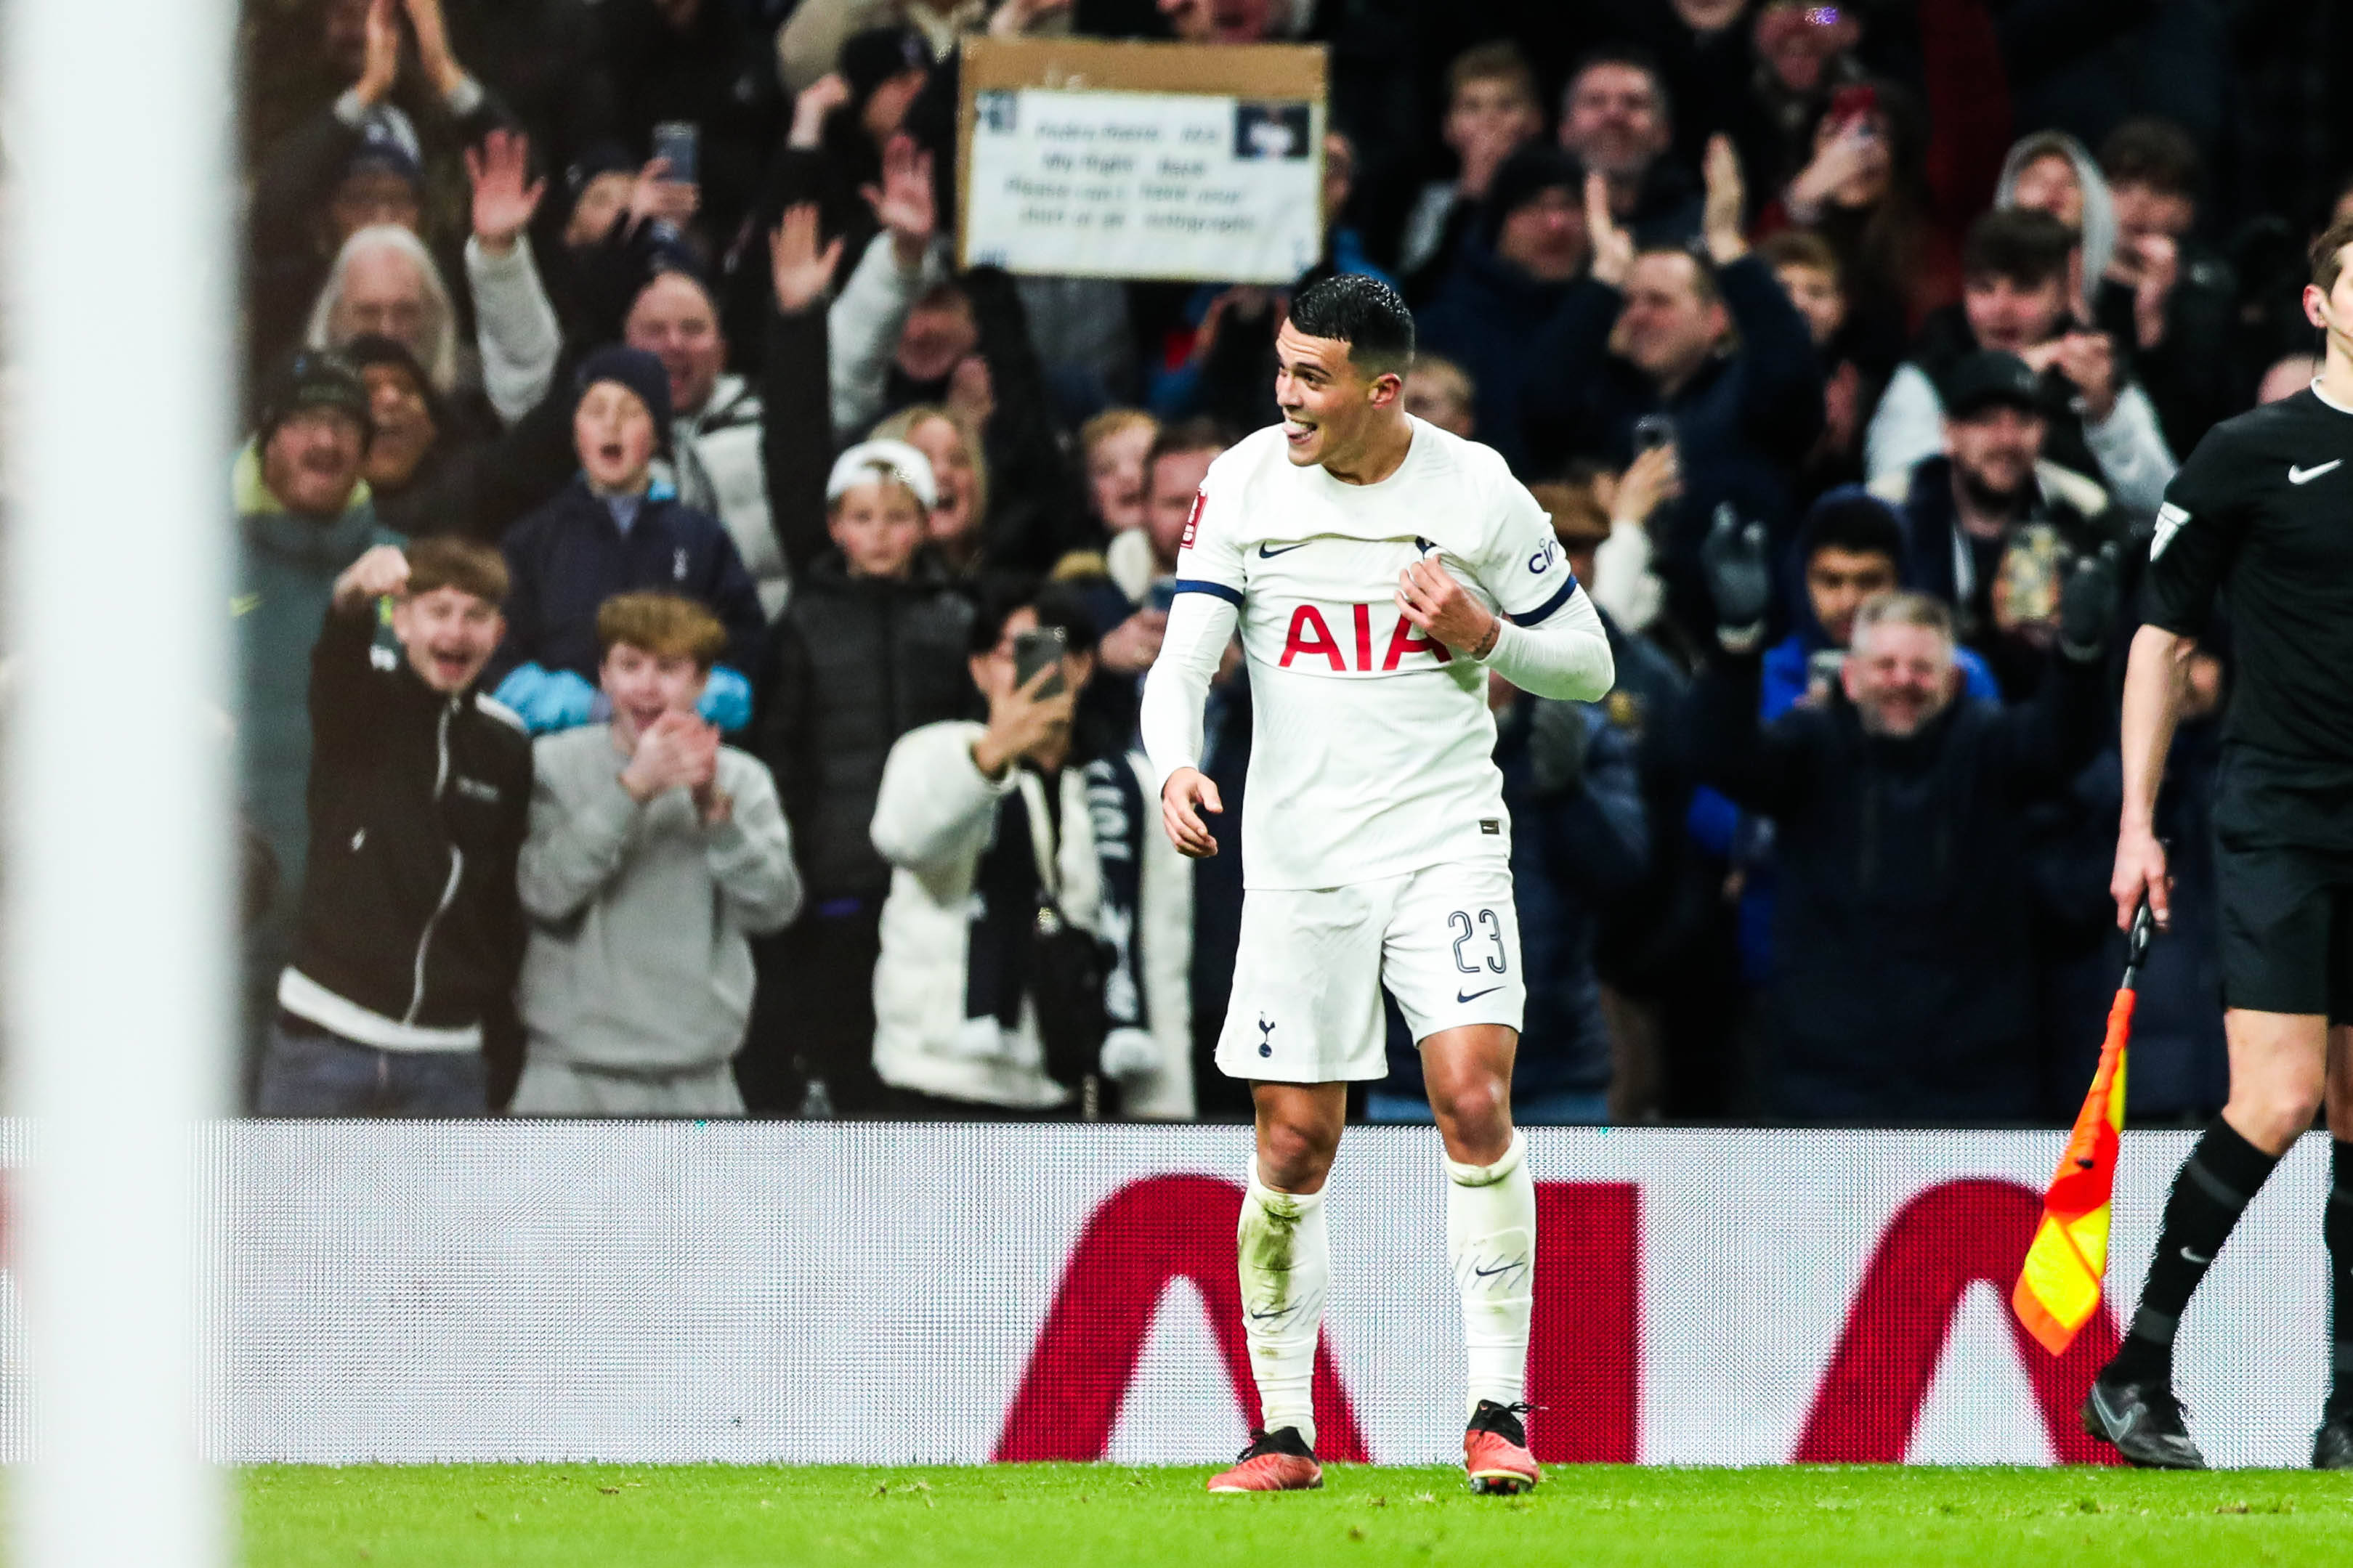 Pedro Porro pictured celebrating after scoring a brilliant goal for Tottenham Hotspur in a 1-0 win over Burnley in the FA Cup in January 2024